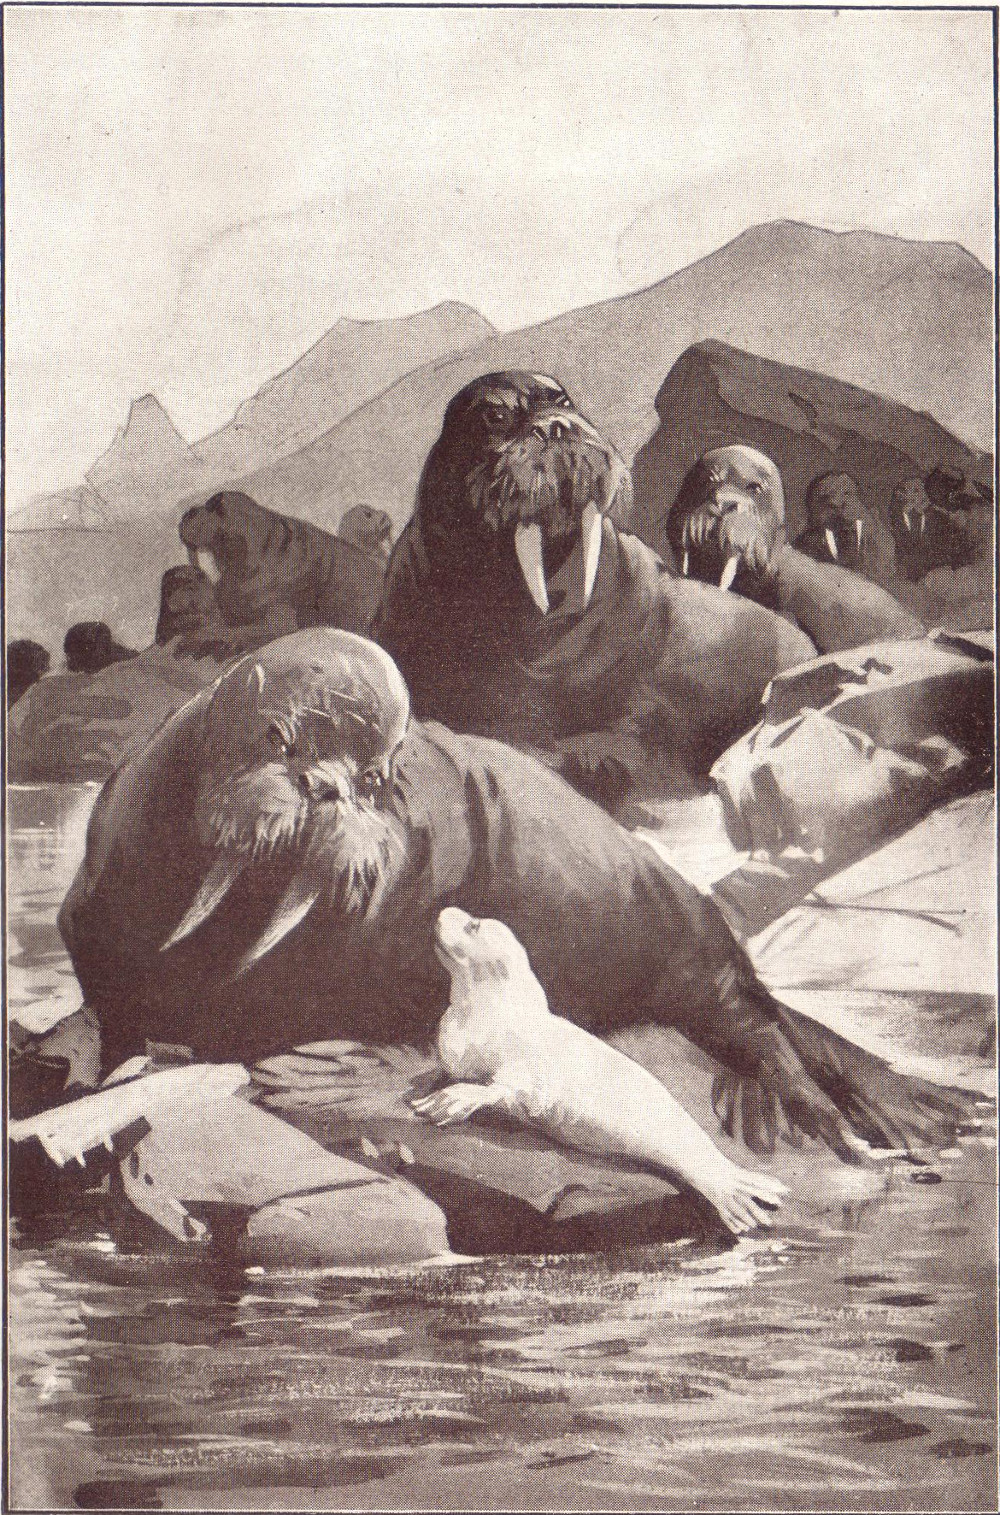 A white baby seal looking up at a fully grown walrus amidst a group of other walruses on a rocky shoreline